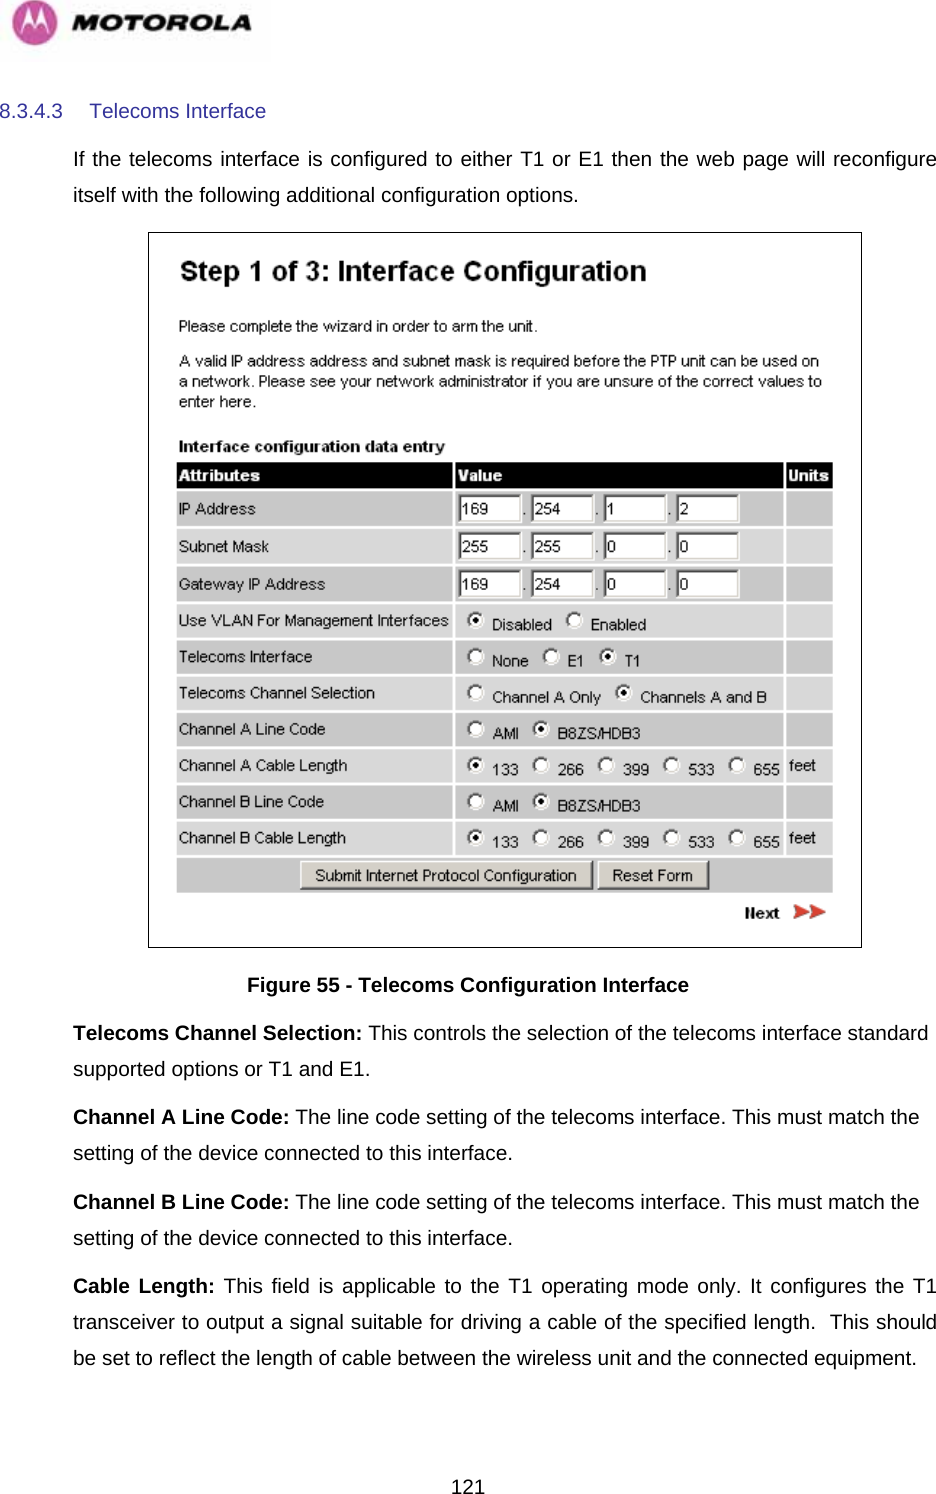   1218.3.4.3 Telecoms Interface If the telecoms interface is configured to either T1 or E1 then the web page will reconfigure itself with the following additional configuration options.  Figure 55 - Telecoms Configuration Interface Telecoms Channel Selection: This controls the selection of the telecoms interface standard supported options or T1 and E1. Channel A Line Code: The line code setting of the telecoms interface. This must match the setting of the device connected to this interface. Channel B Line Code: The line code setting of the telecoms interface. This must match the setting of the device connected to this interface. Cable Length: This field is applicable to the T1 operating mode only. It configures the T1 transceiver to output a signal suitable for driving a cable of the specified length.  This should be set to reflect the length of cable between the wireless unit and the connected equipment.  